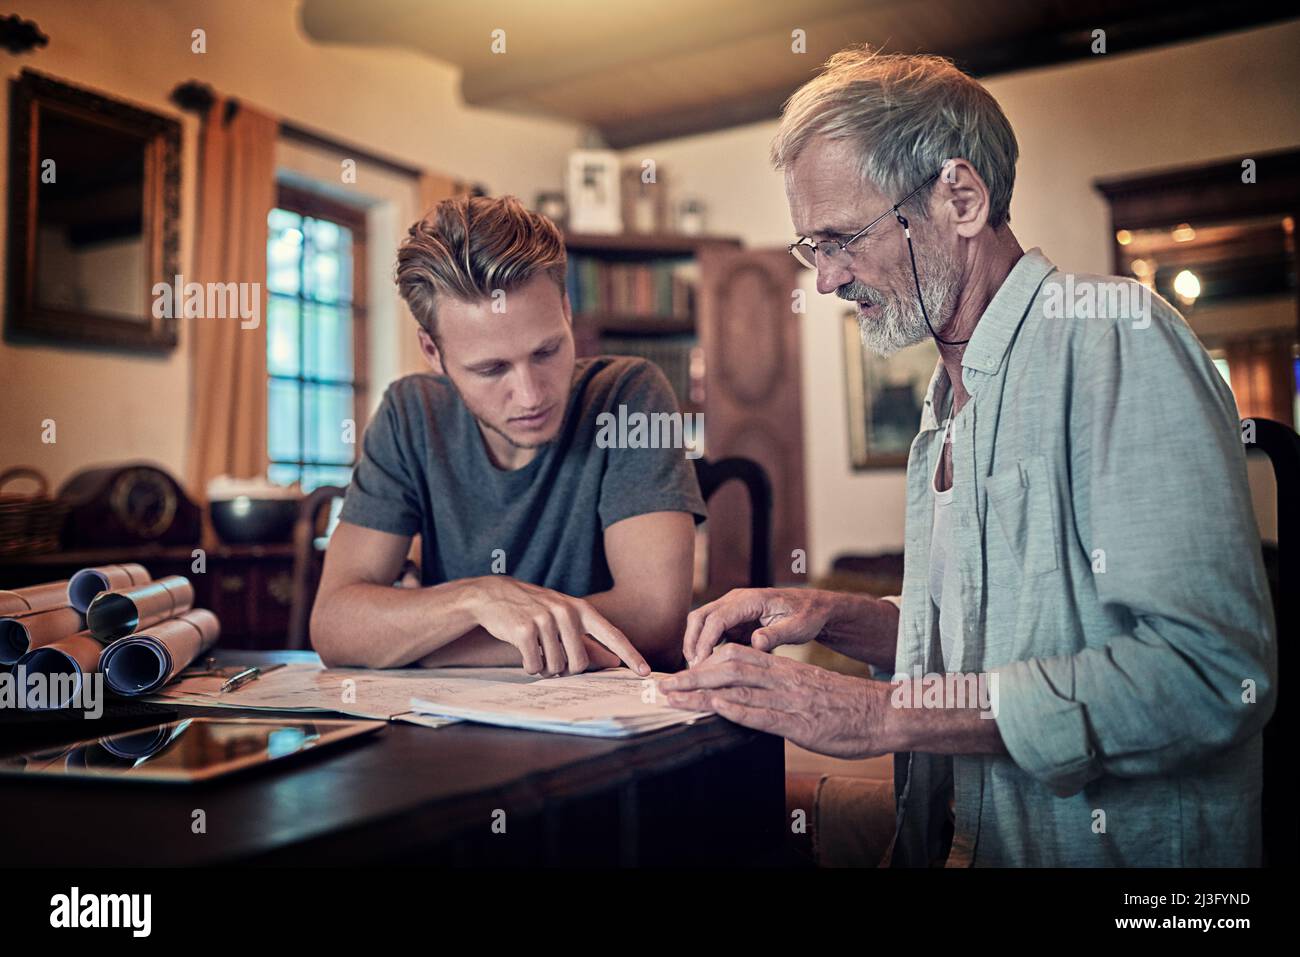 These great minds think alike. Shot of a father and his son working on a design for their family business at home. Stock Photo